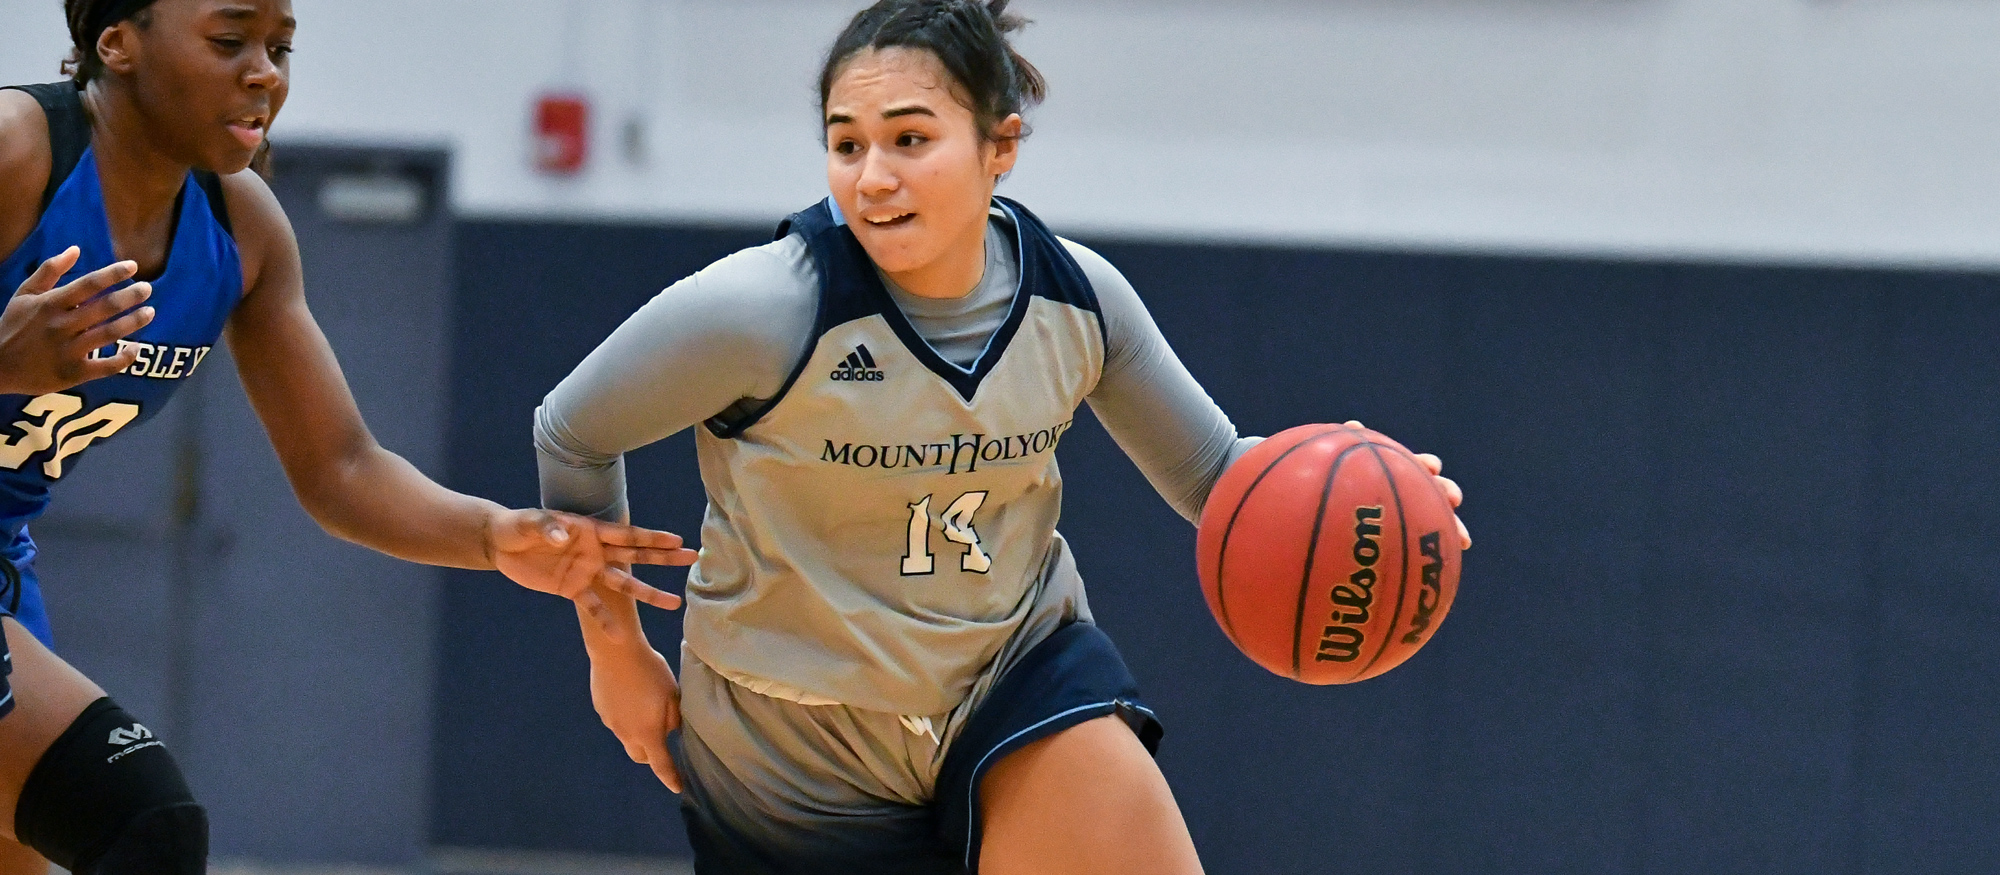 Marley Berano assisted on three Mount Holyoke 3-pointers in a row during the second quarter, and finished with 16 points in the Lyons' 51-43 win over Dean College on Nov. 19, 2022. (RJB Sports file photo)